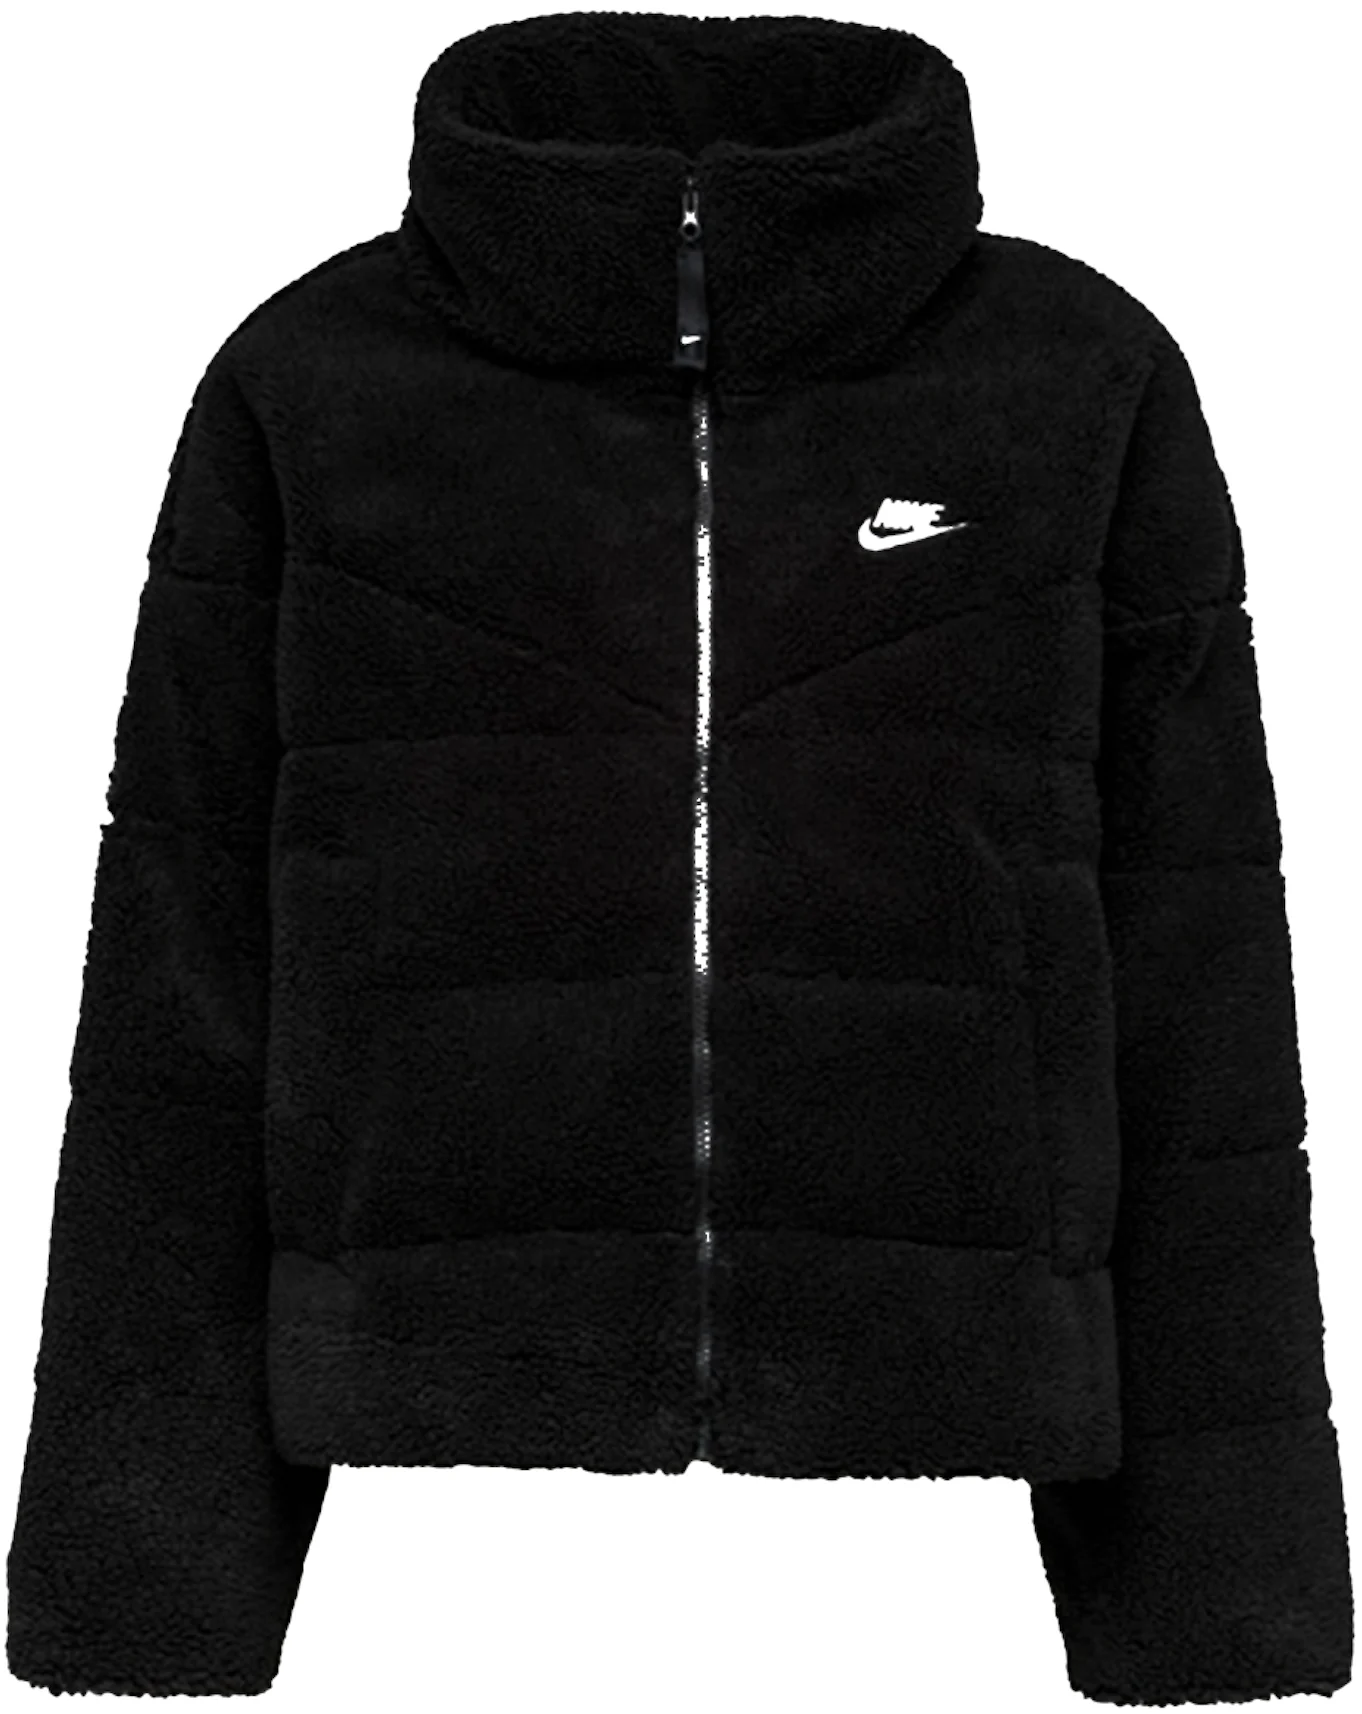 Nike Sportswear Therma-FIT Repel Jacket, black and white